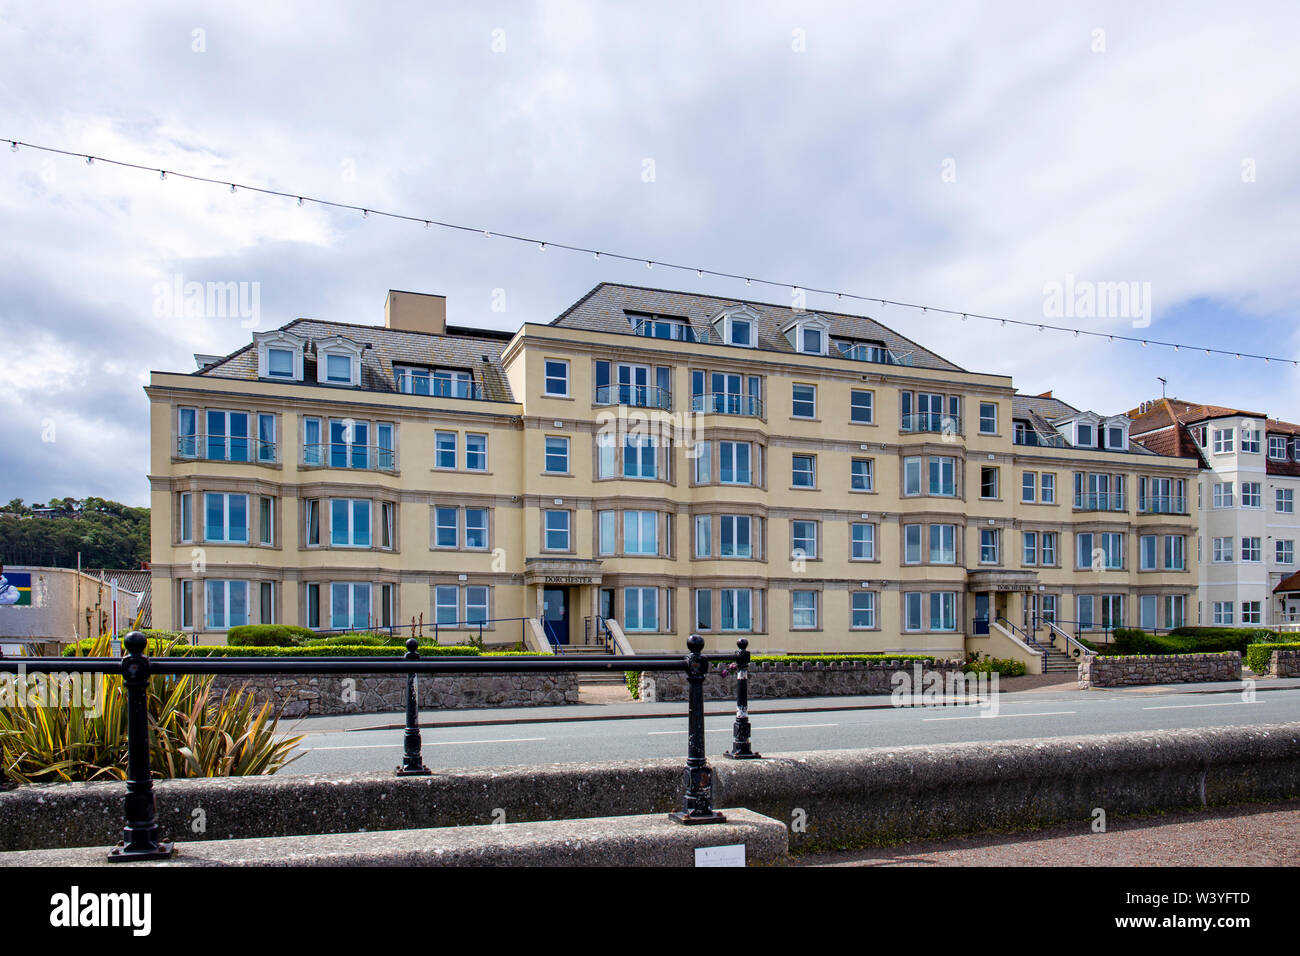 Dorchester, former hotel, now retirements apartments on the seafront in Llandudno Conwy Wales UK Stock Photo